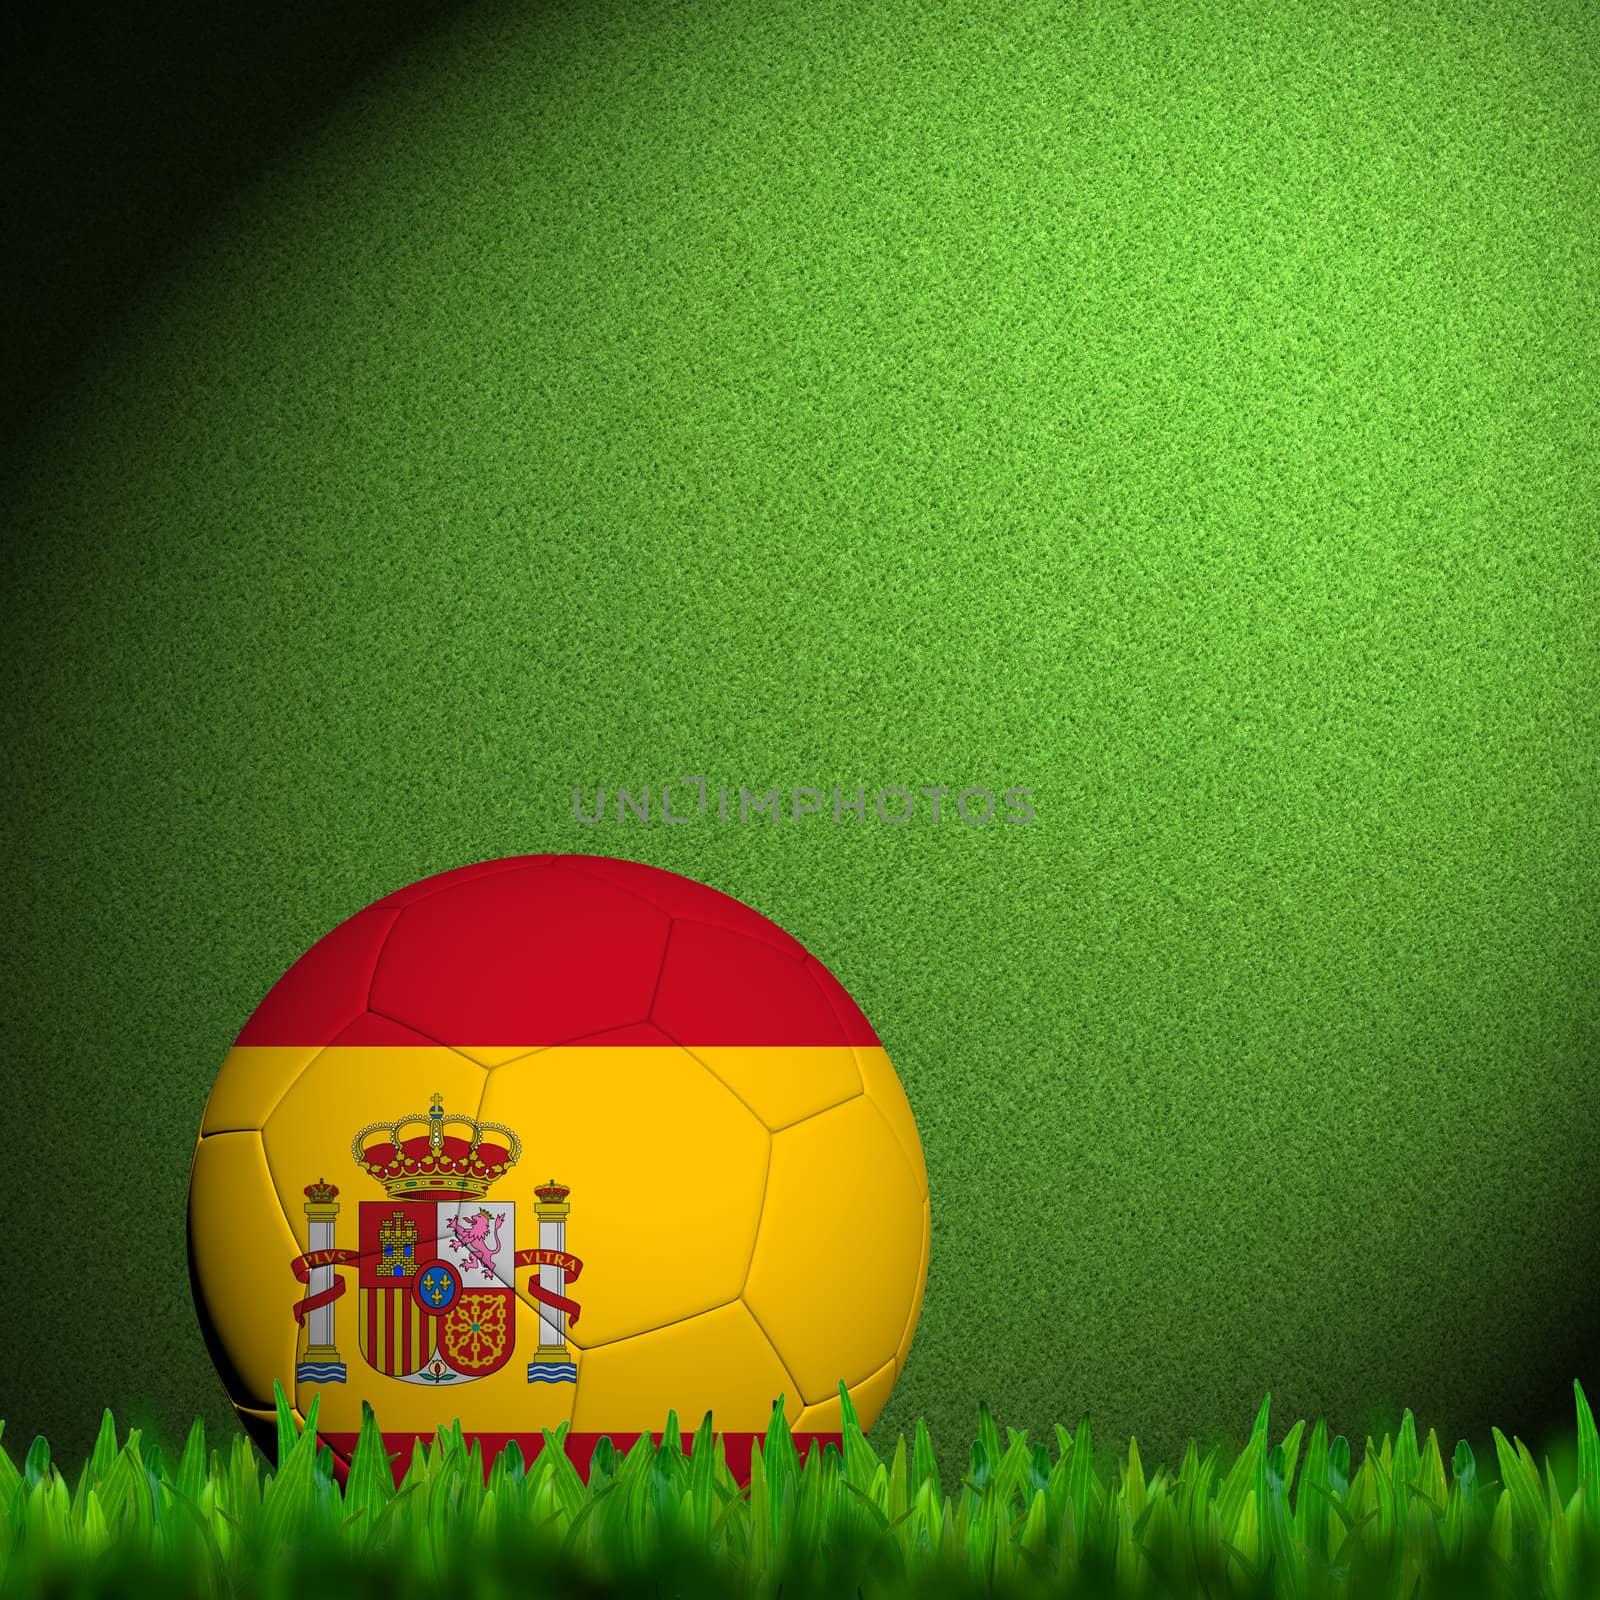 3D Football Spain Flag Patter in green grass  by jakgree